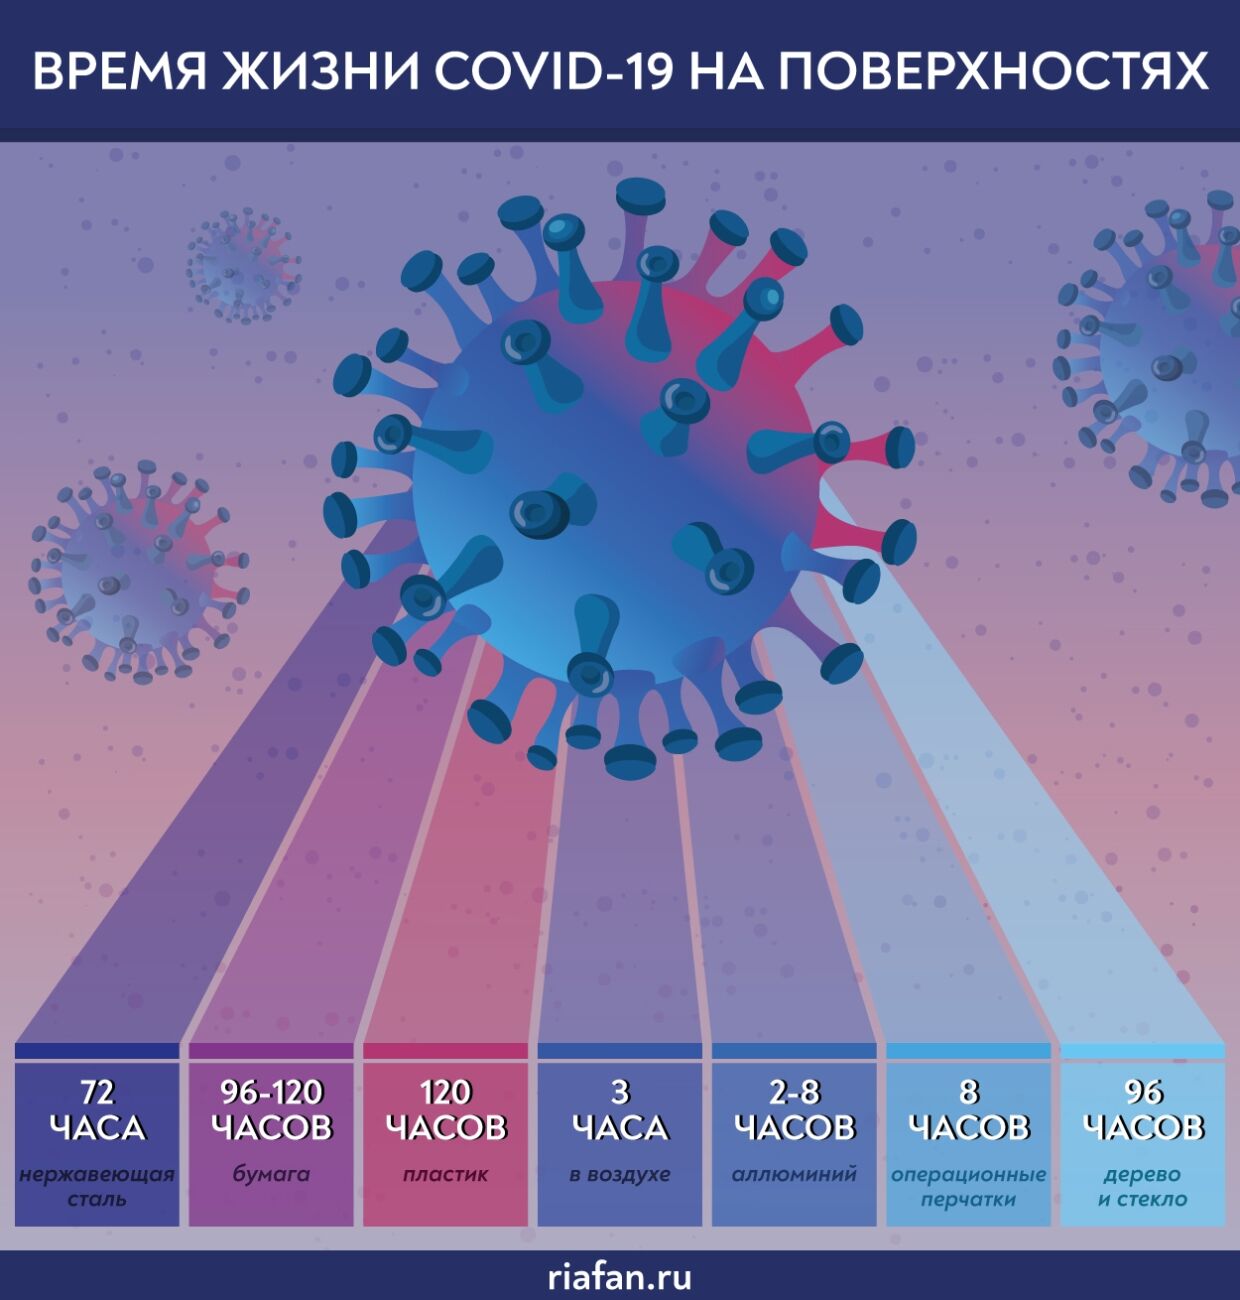 Fedorov MP called on the West to protect the Runet attacks, applying coronavirus as a weapon